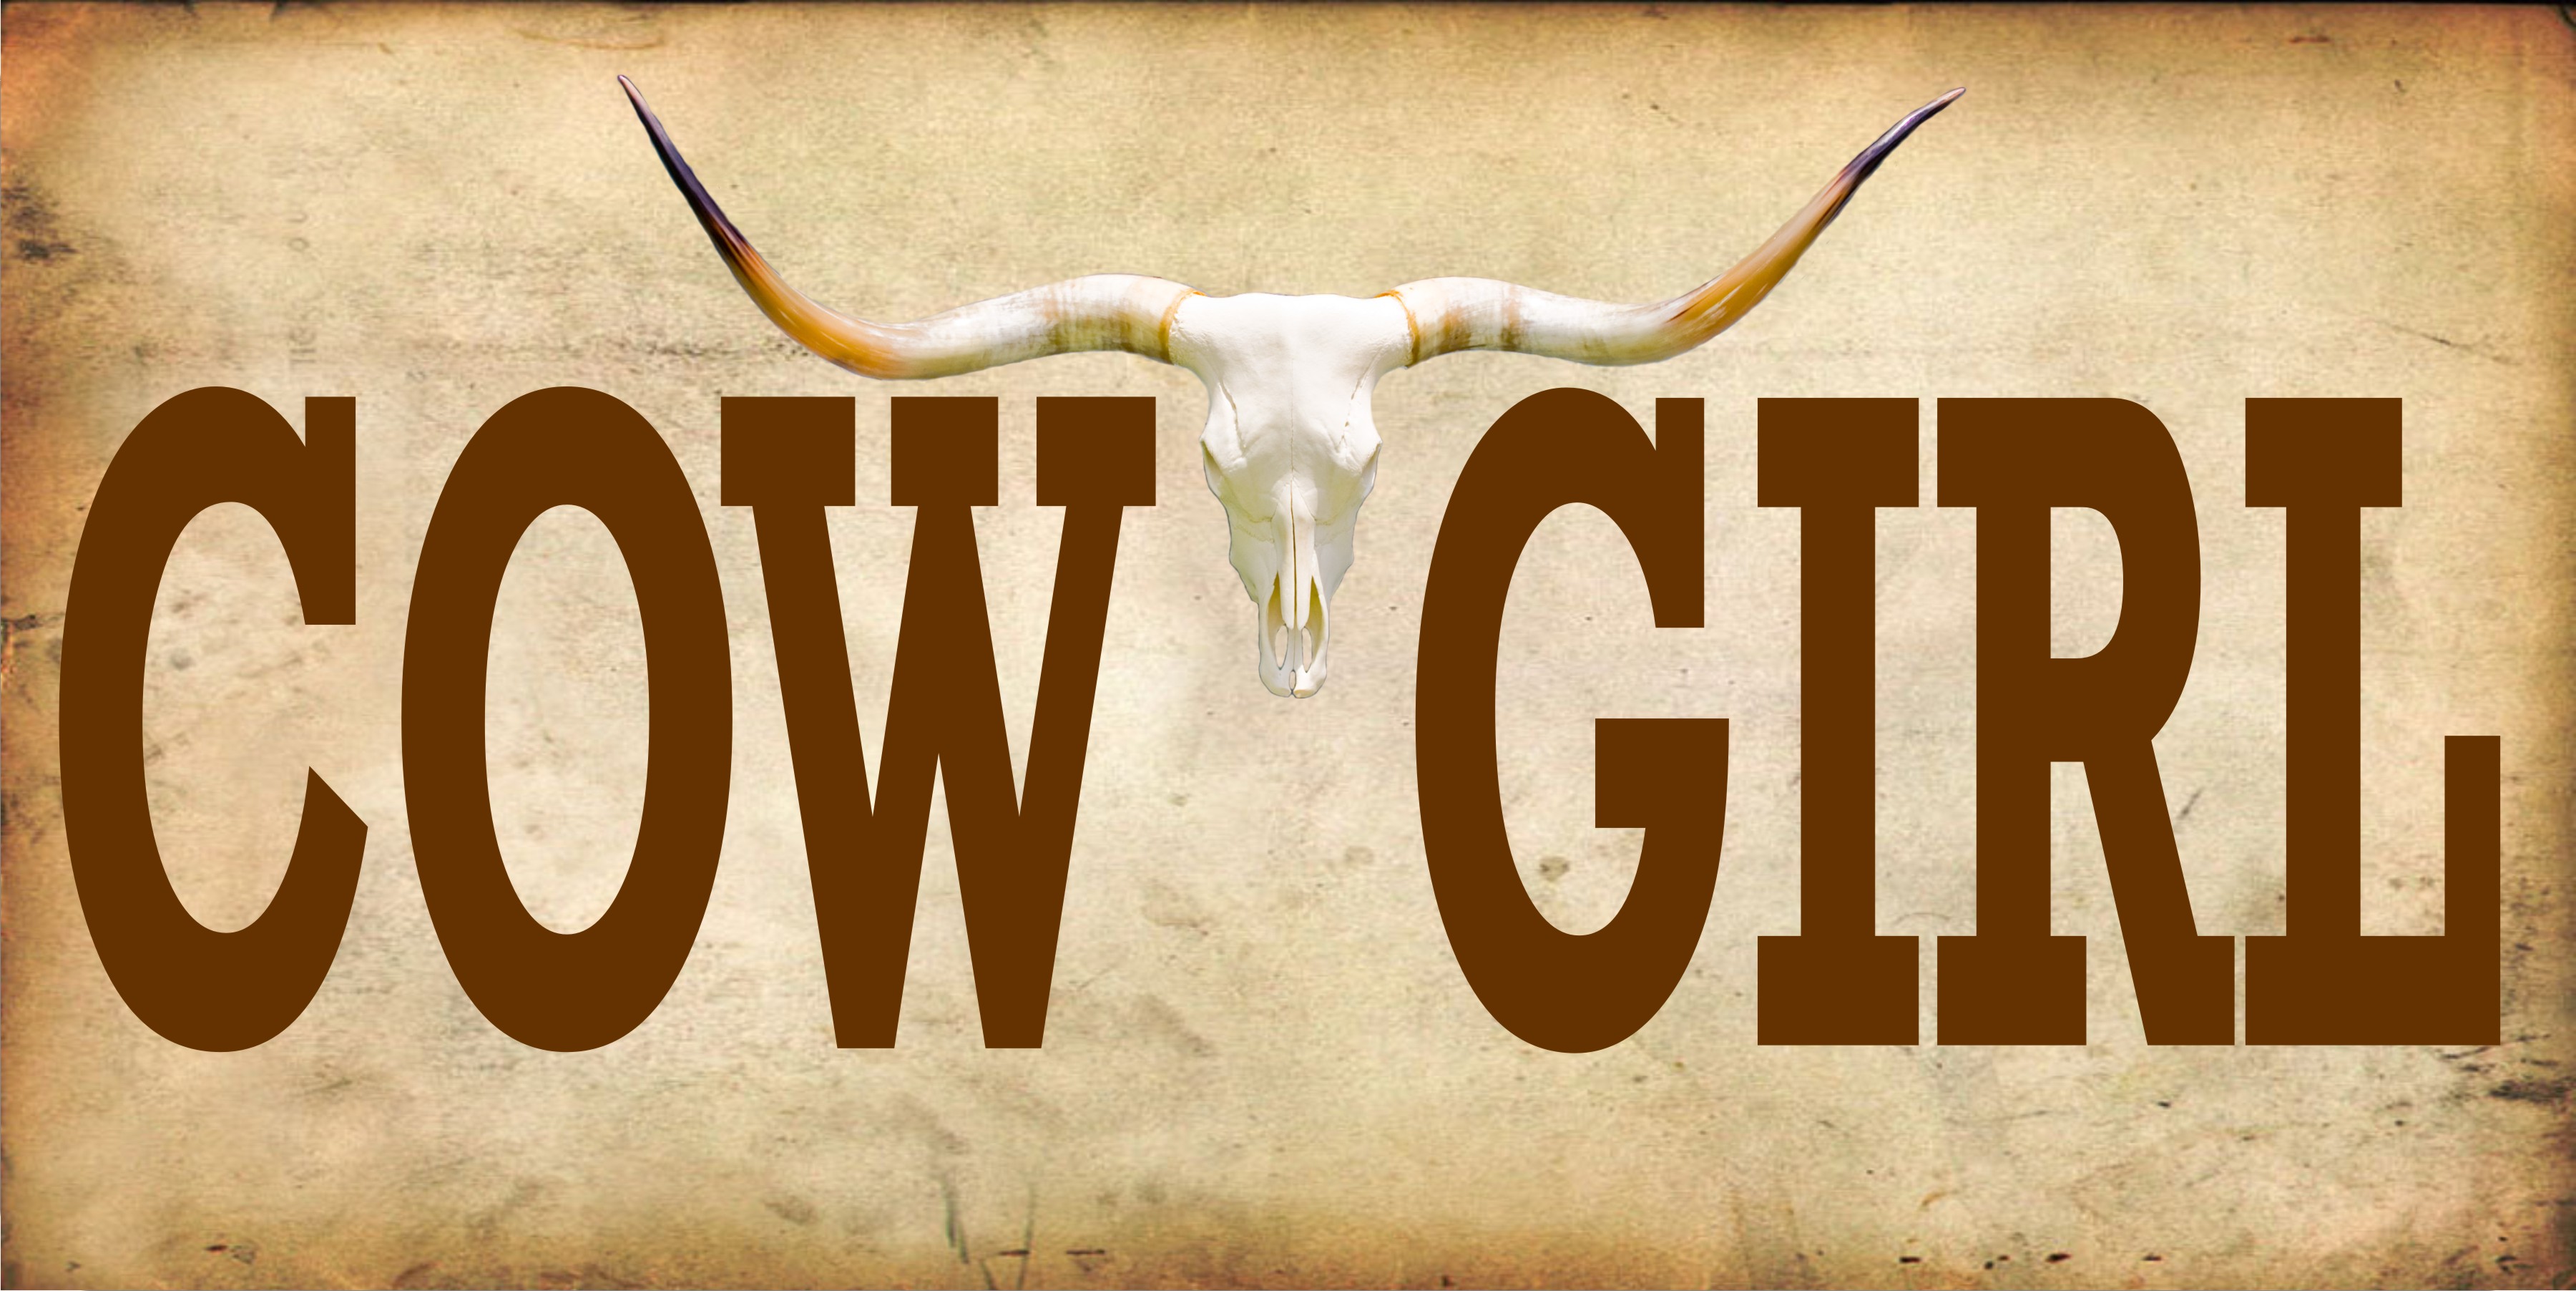 Longhorn Cowgirl Photo License Plate